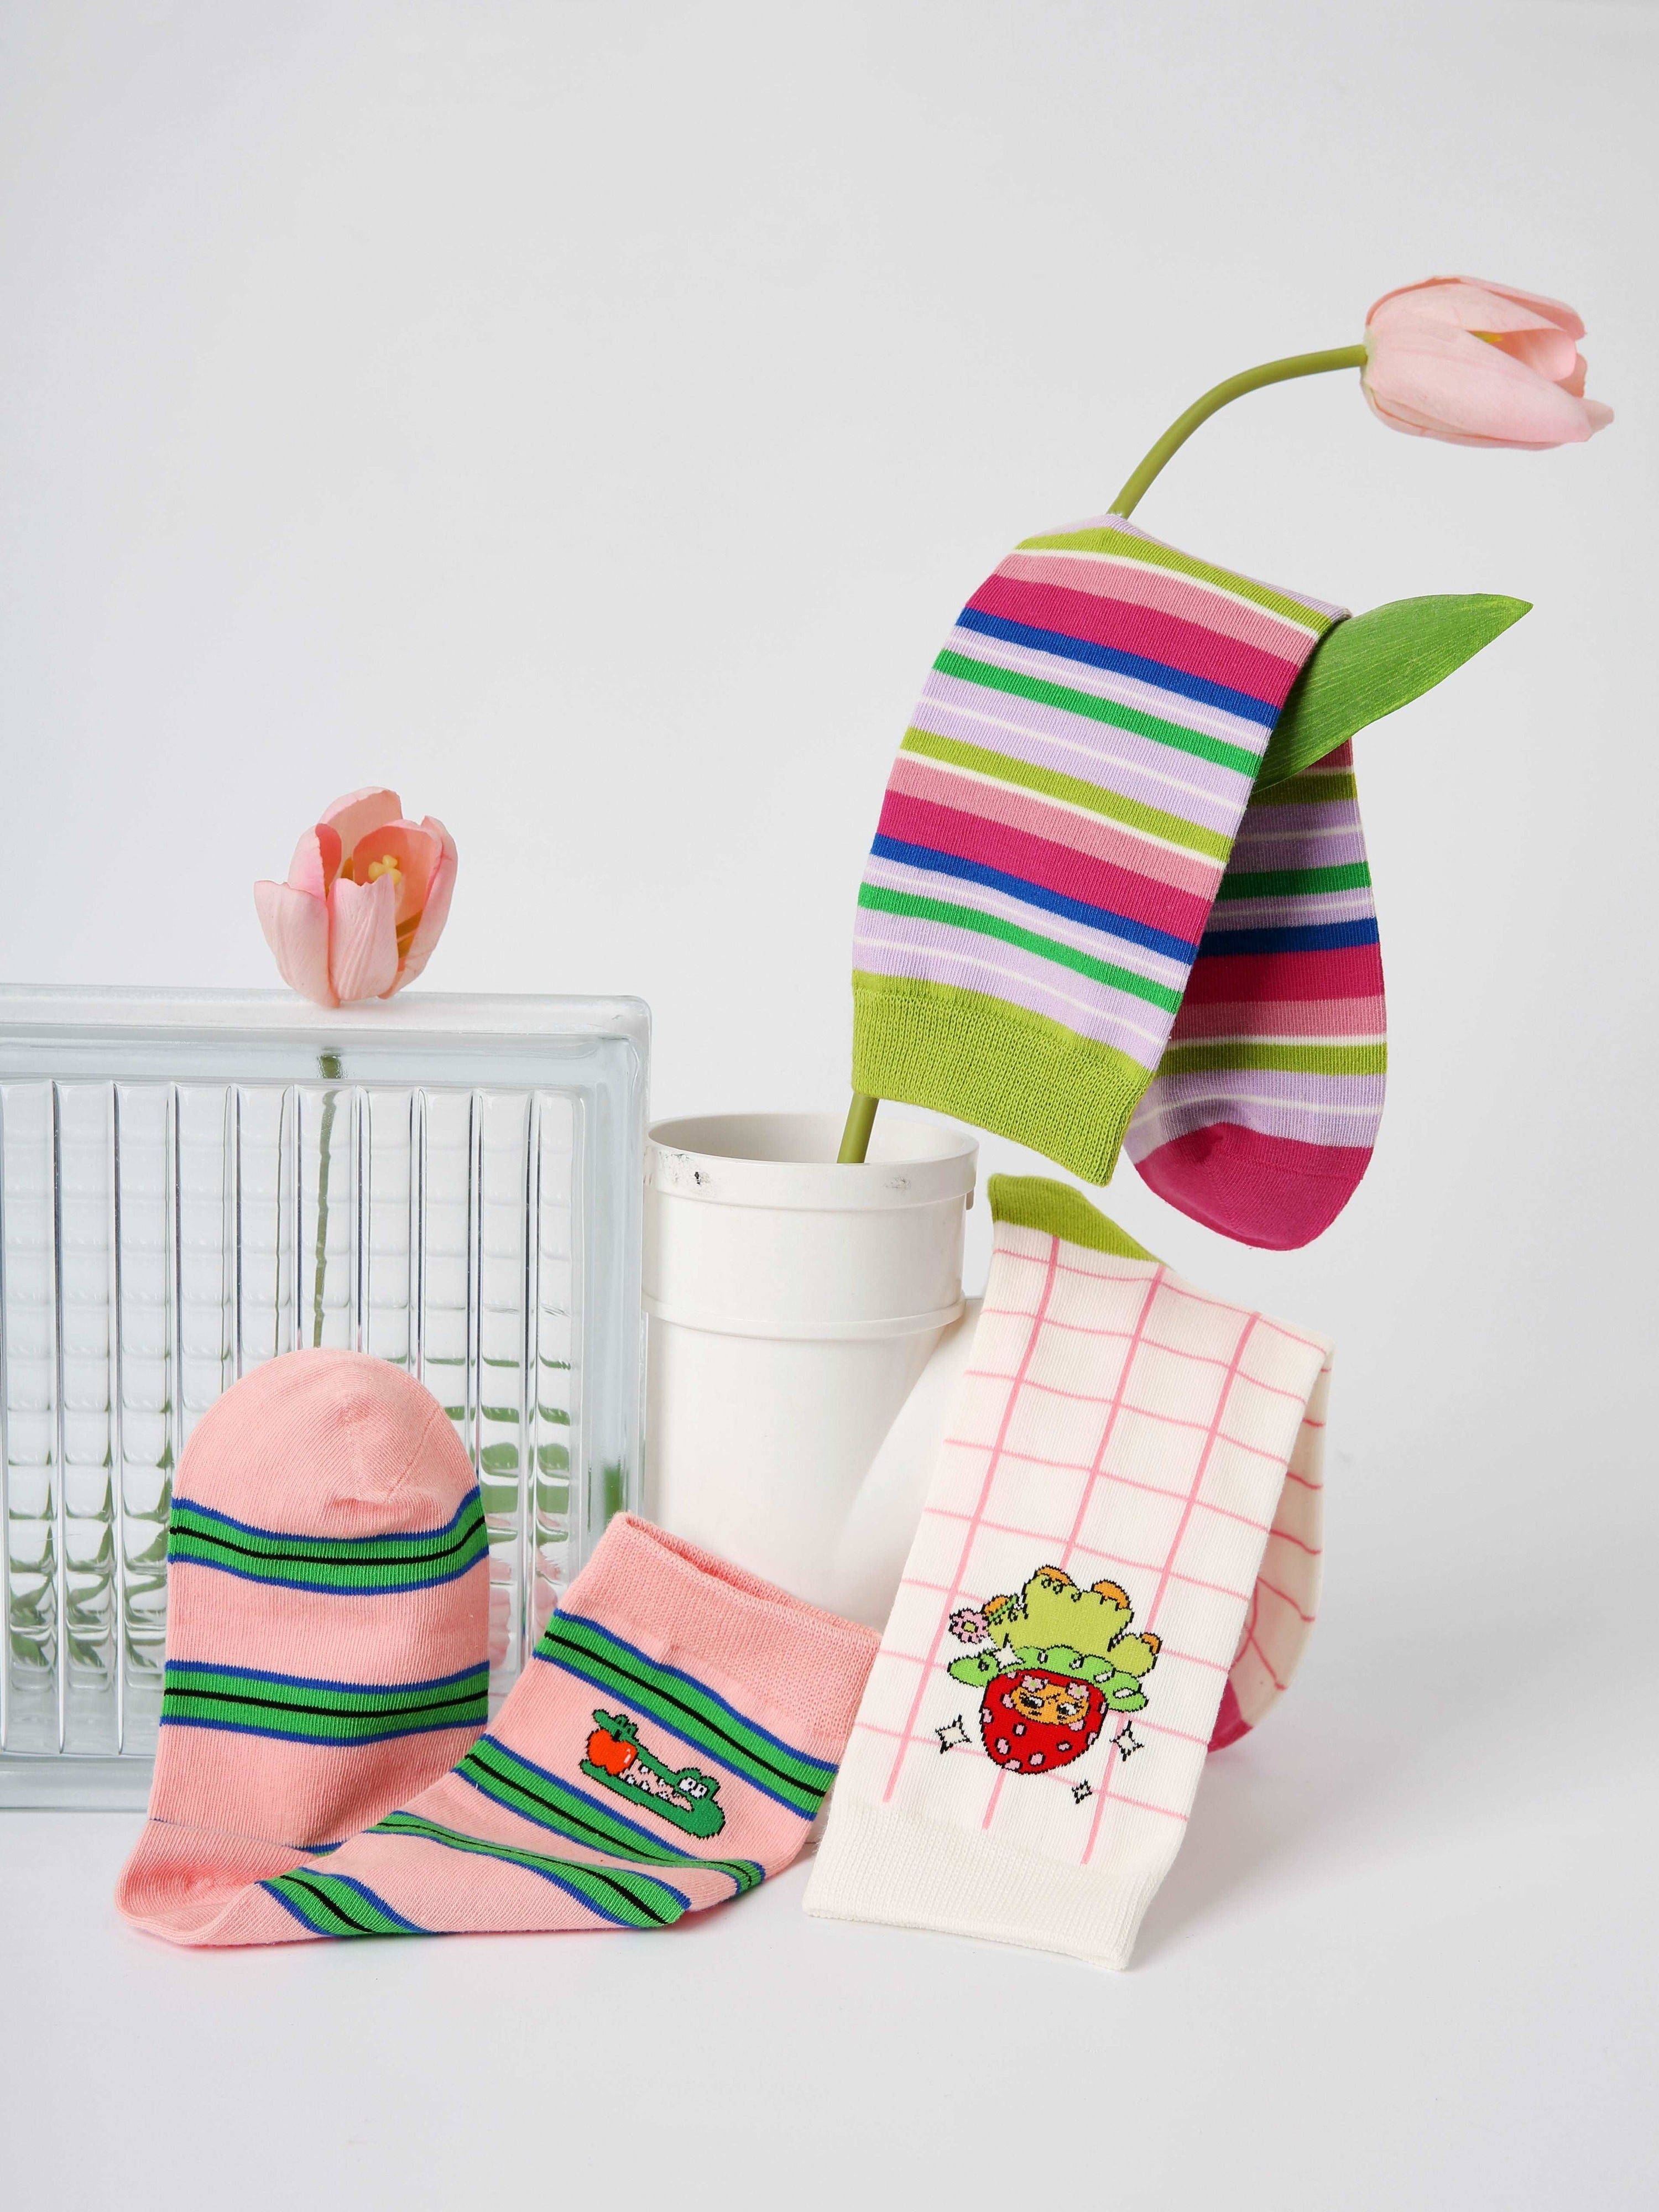 An arrangement of Y2K-inspired socks with autumn and winter themes, alongside a decorative flower